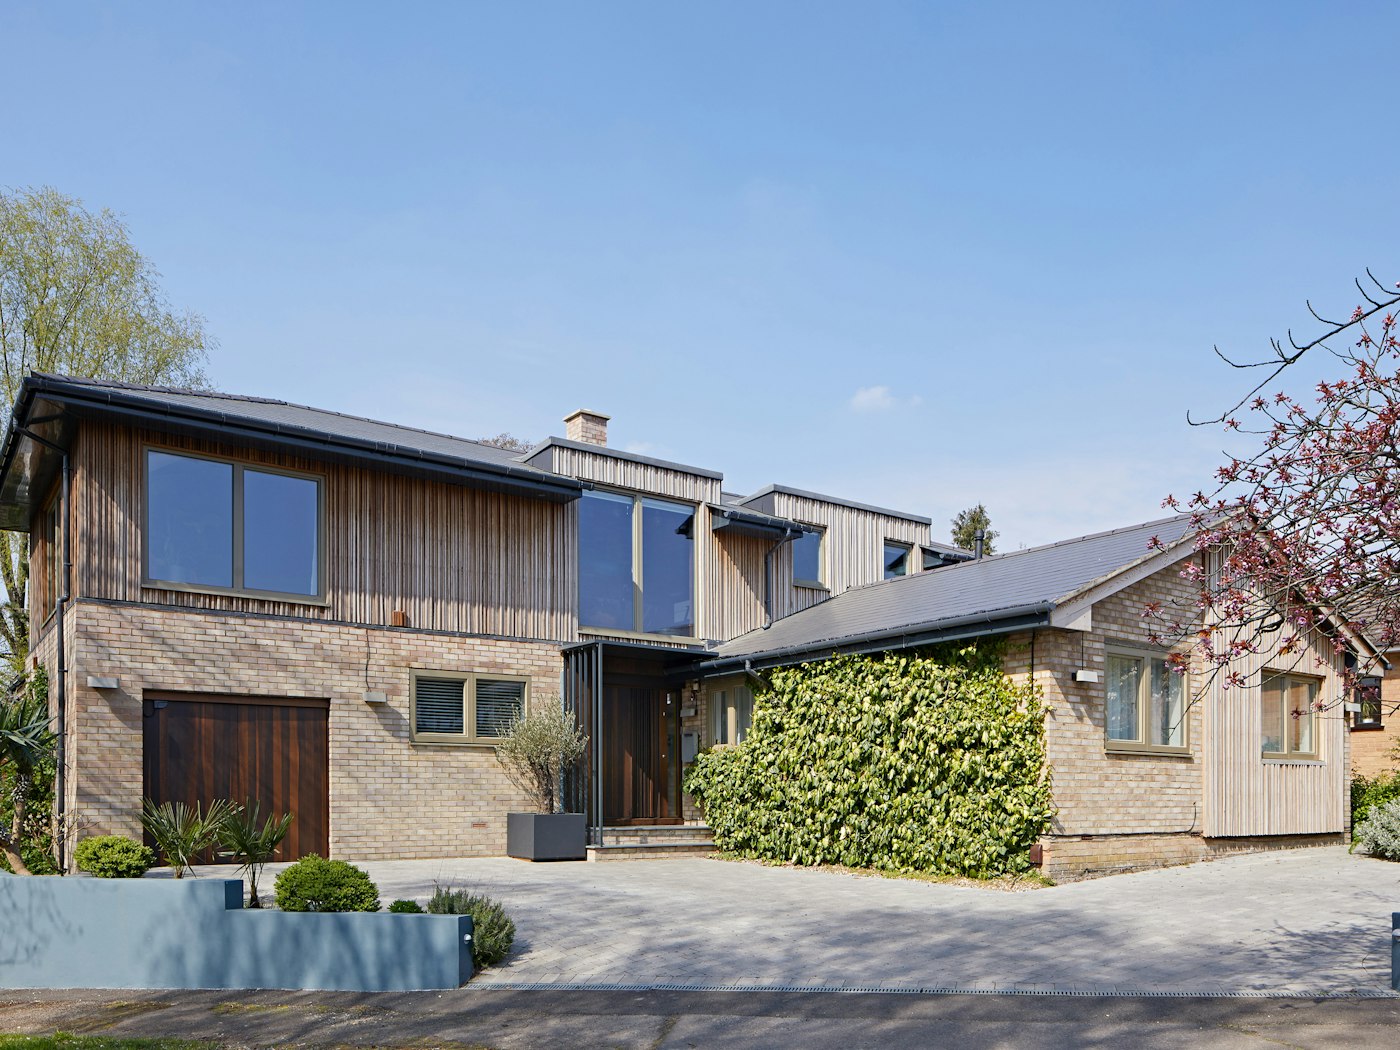 A traditional 1970's bungalow gets a contemporary makeover with a whole new upper floor